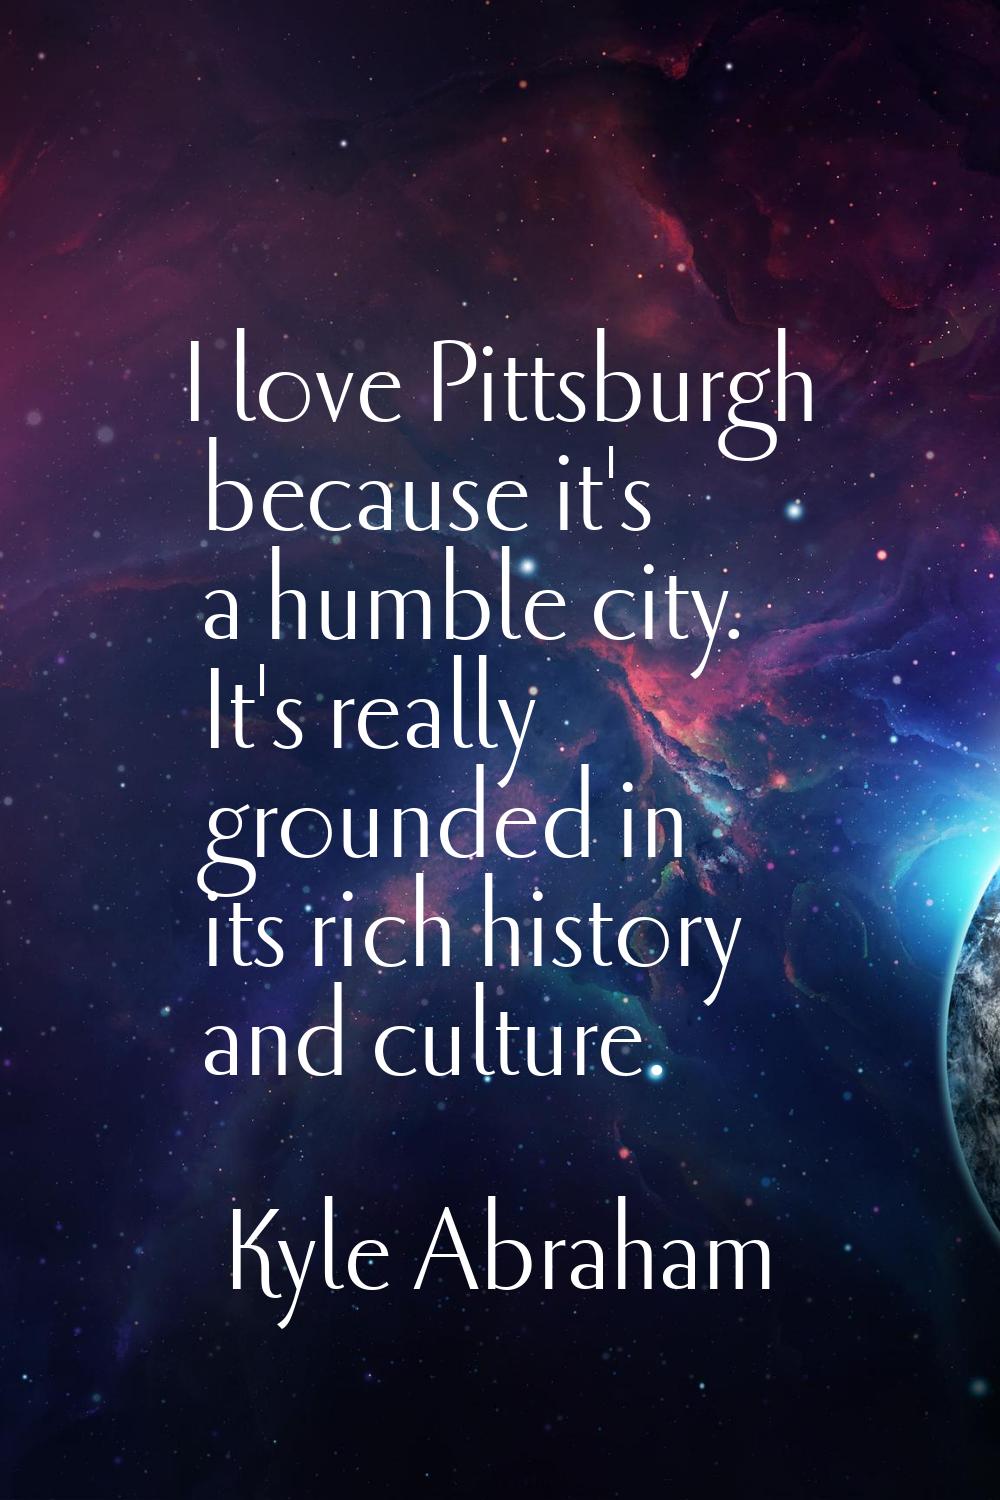 I love Pittsburgh because it's a humble city. It's really grounded in its rich history and culture.